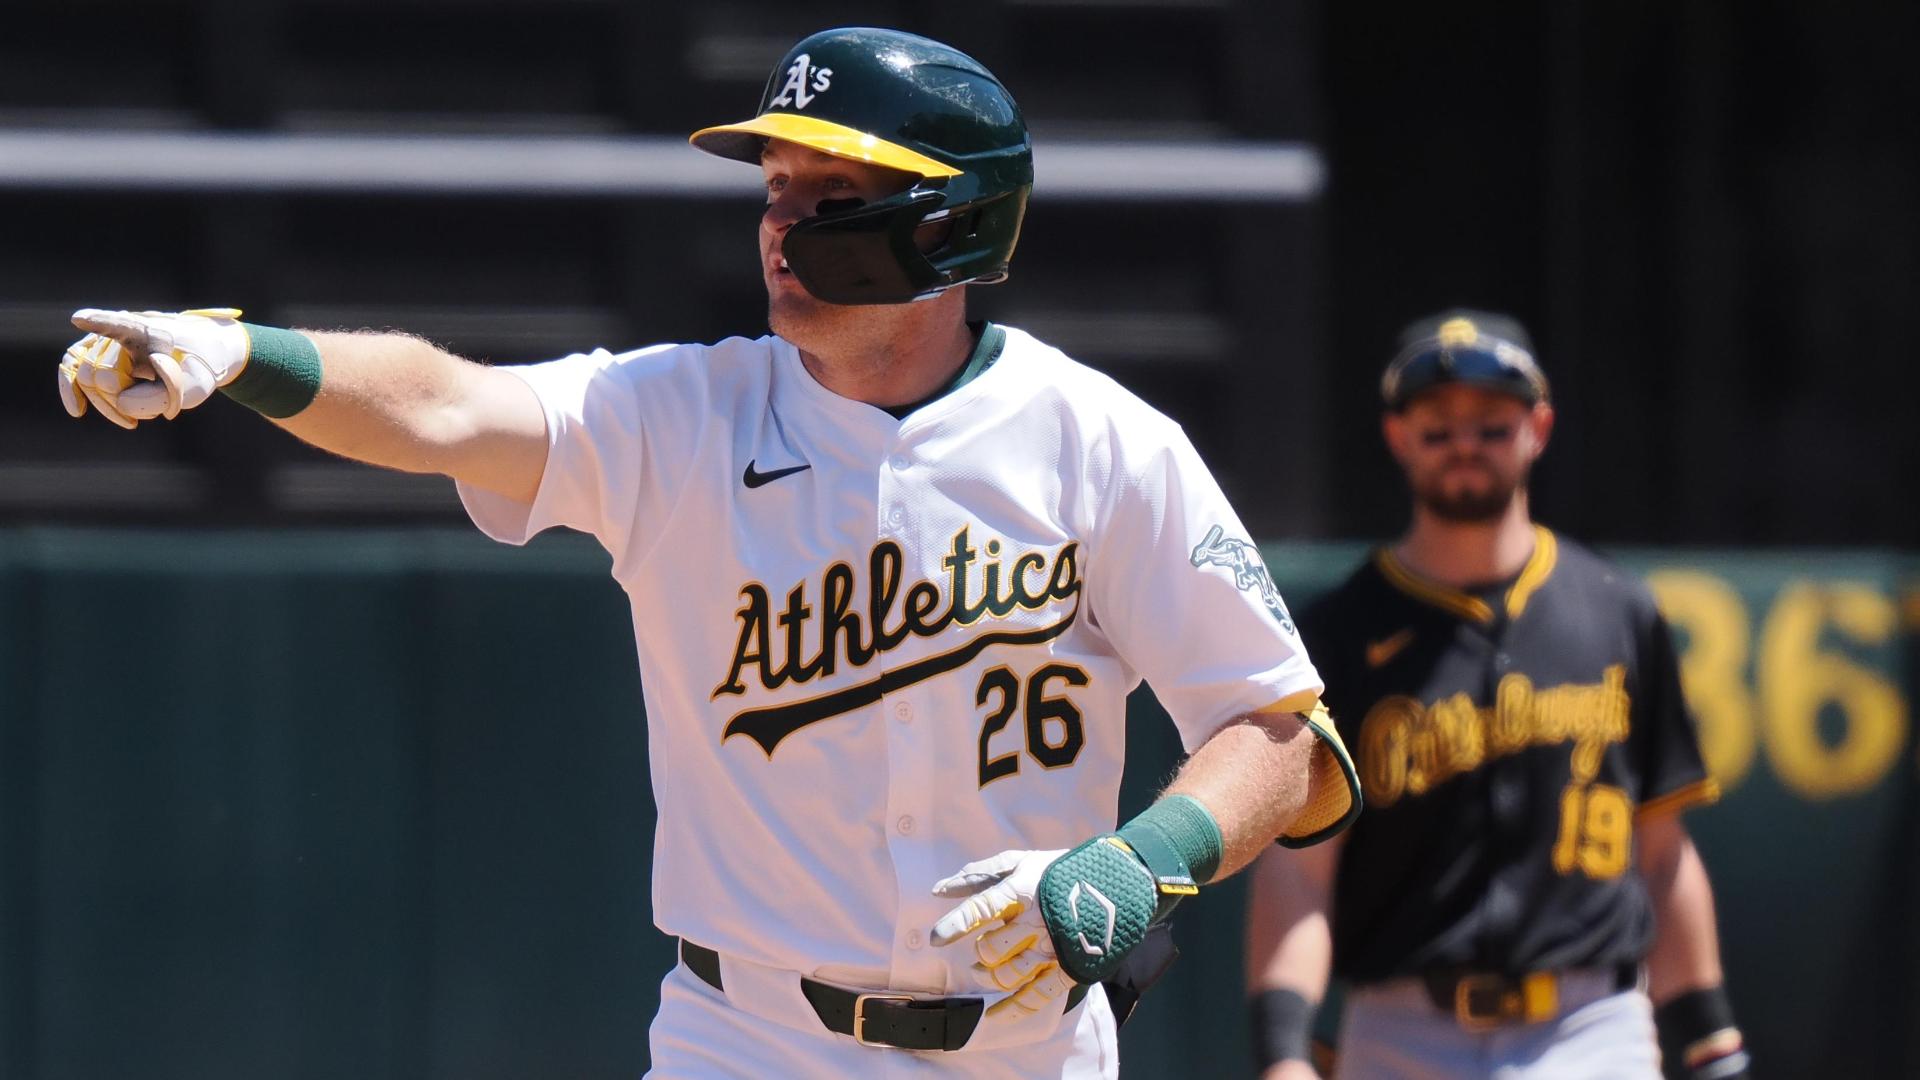 Ross Stripling earns his first win since 2022 as Athletics blank Pirates 4-0